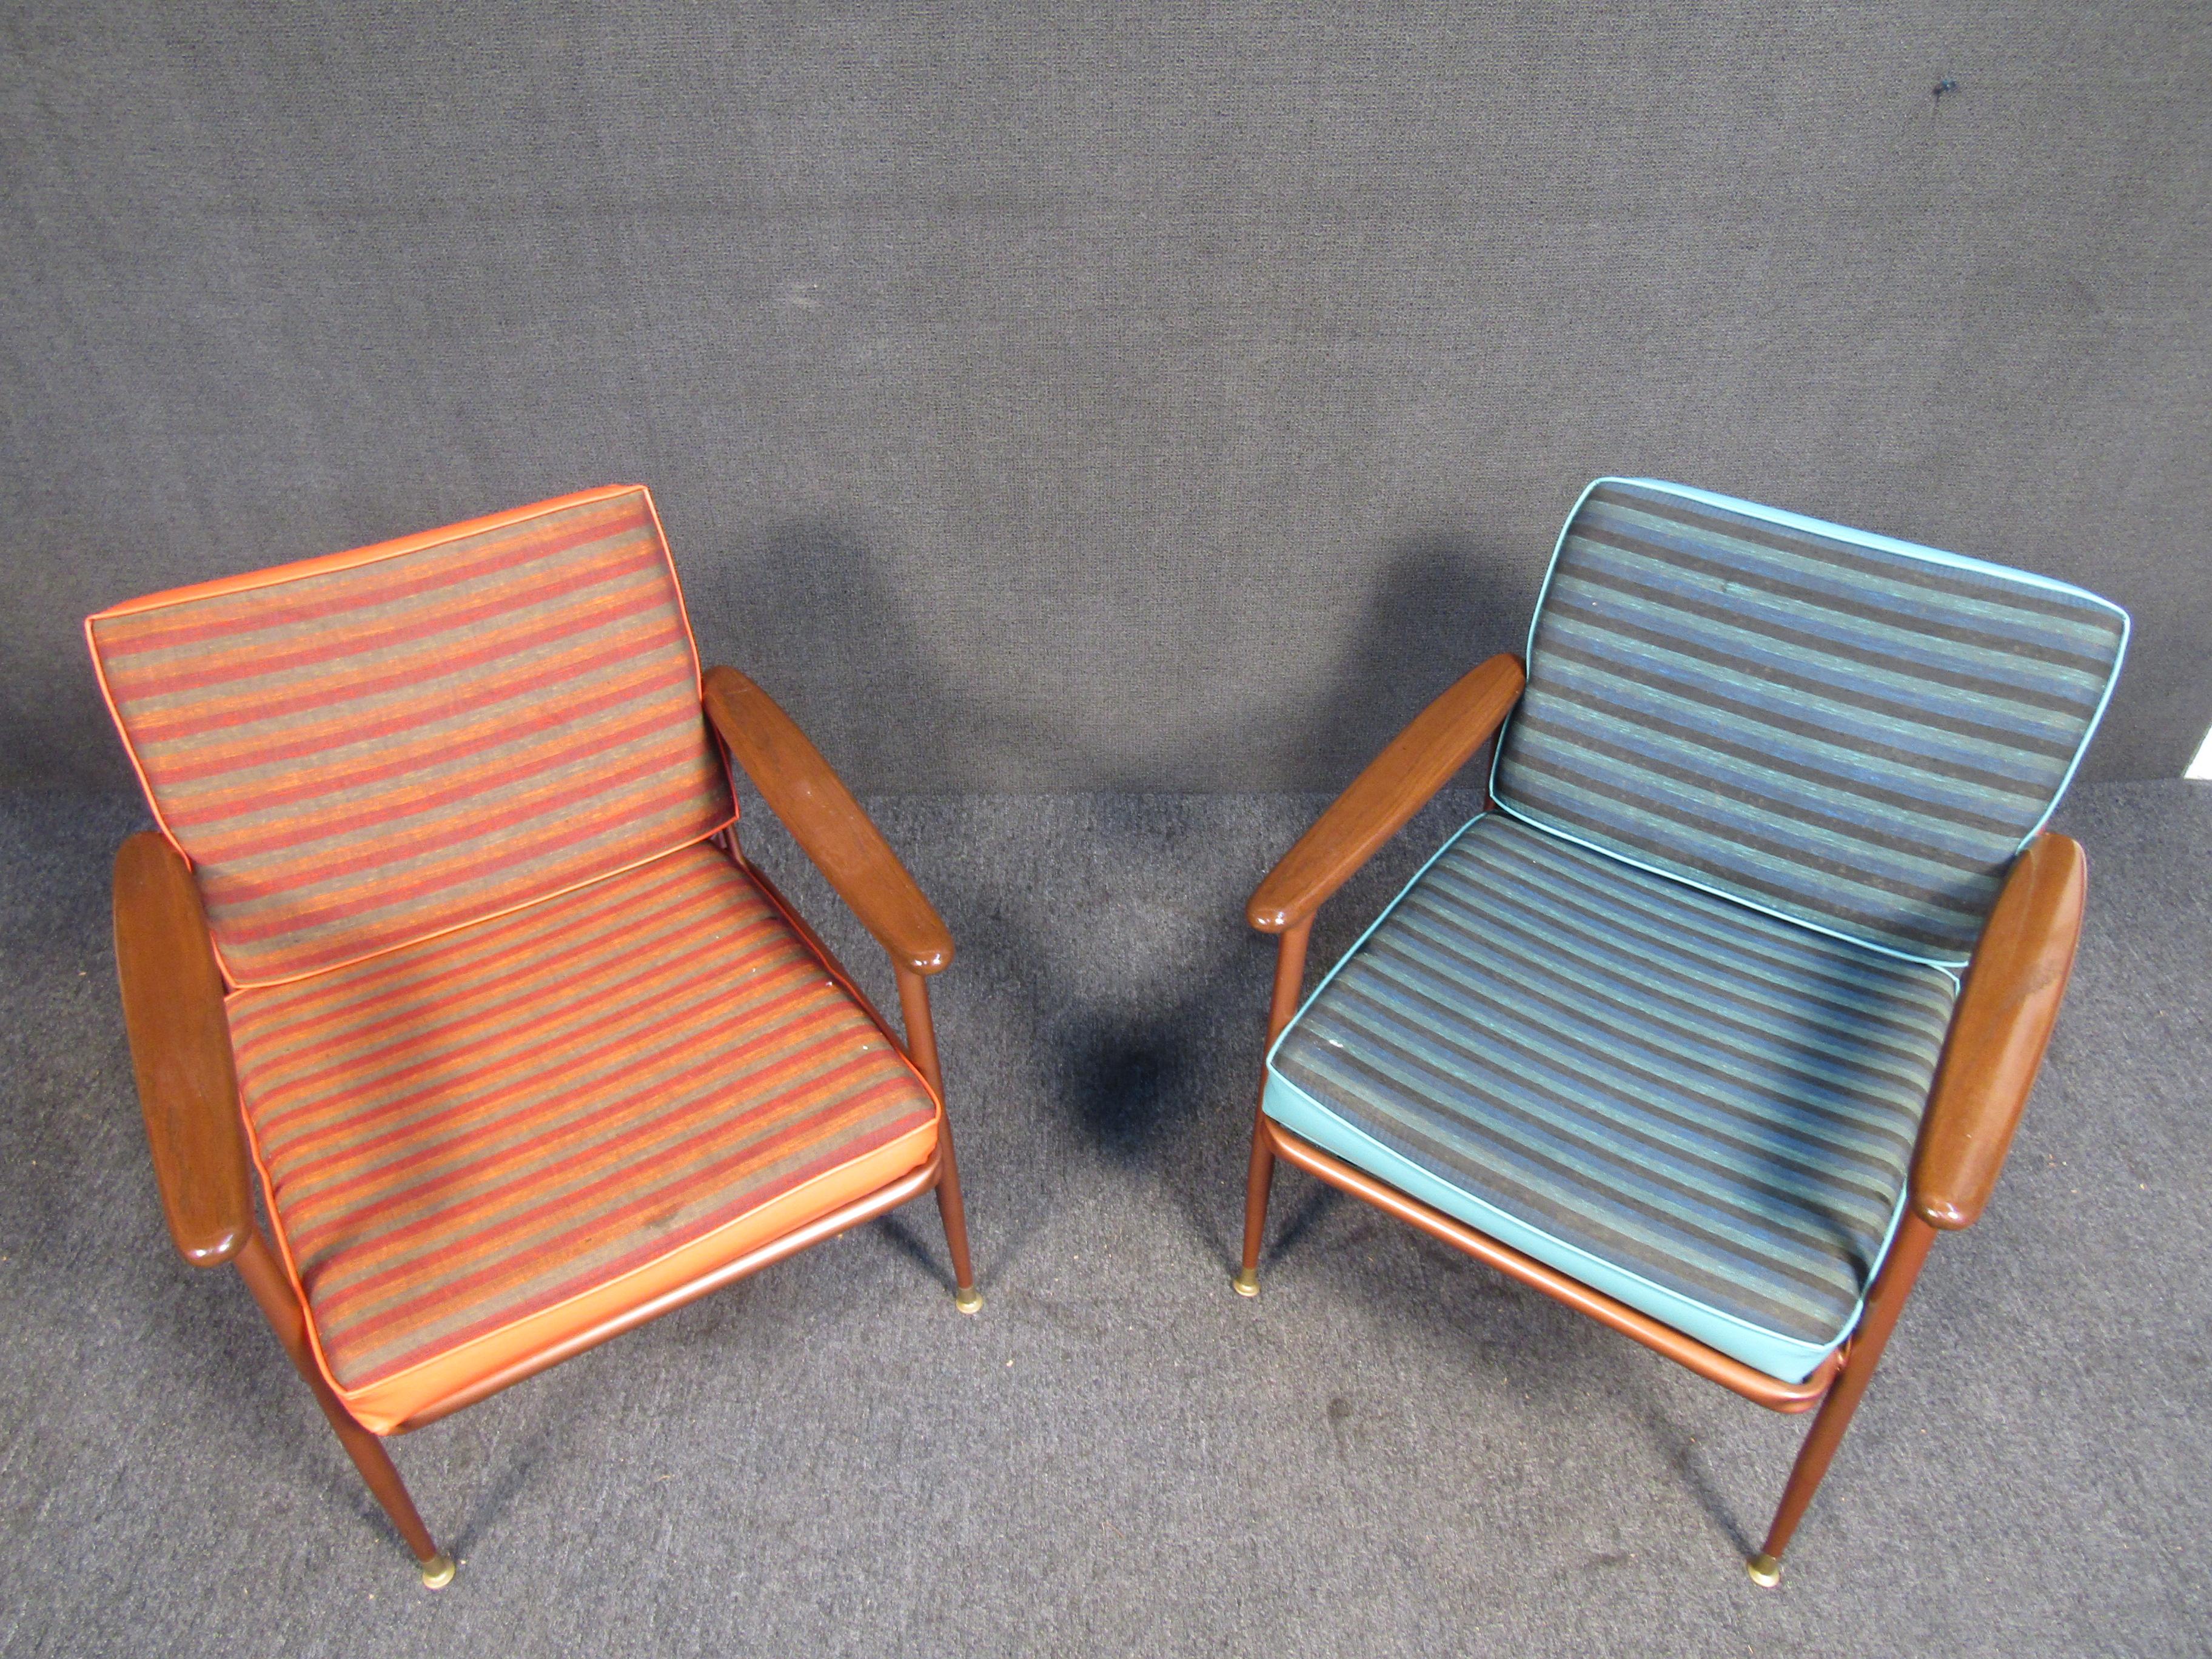 A unique set of vintage arm chairs by Viko Baumritter featuring copper frames, walnut armrests, and contrasting striped upholstery. Please confirm item location with seller (NY/NJ).